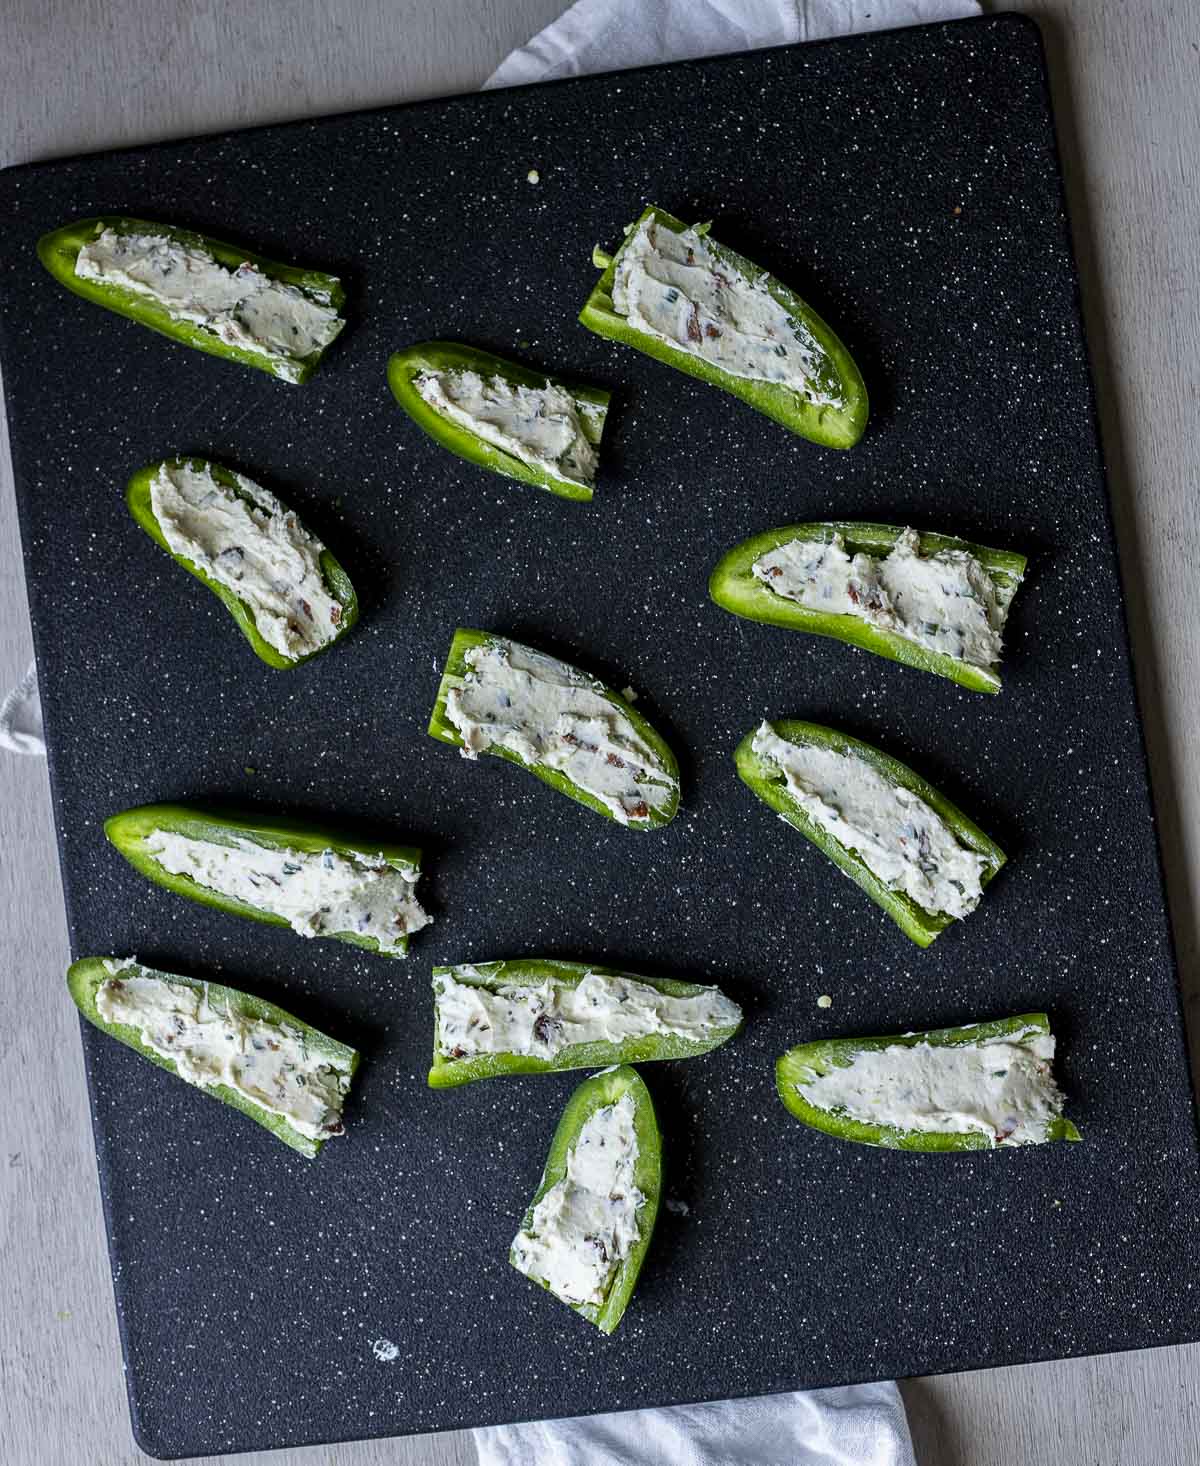 Jalapeños arranged on a work surface and stuffed with cream cheese filling.